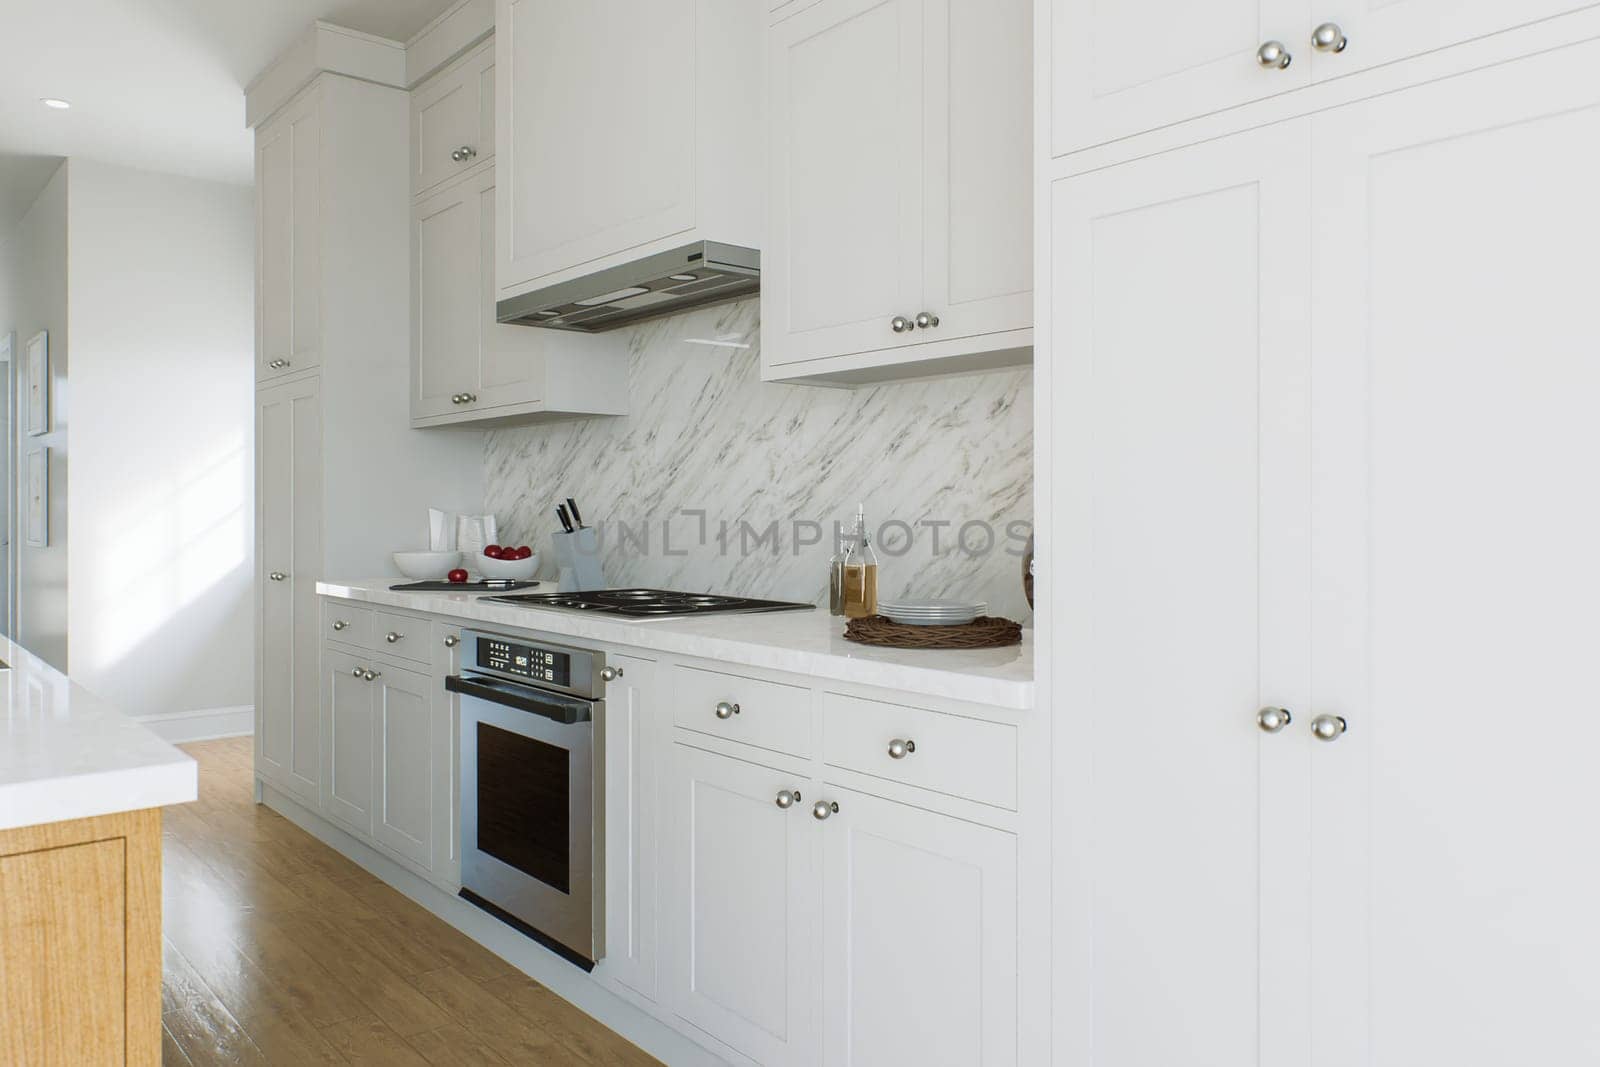 Kitchen with white cabinets, kitchen appliances and wood floors. Kitchen wall with dishes. 3D rendering